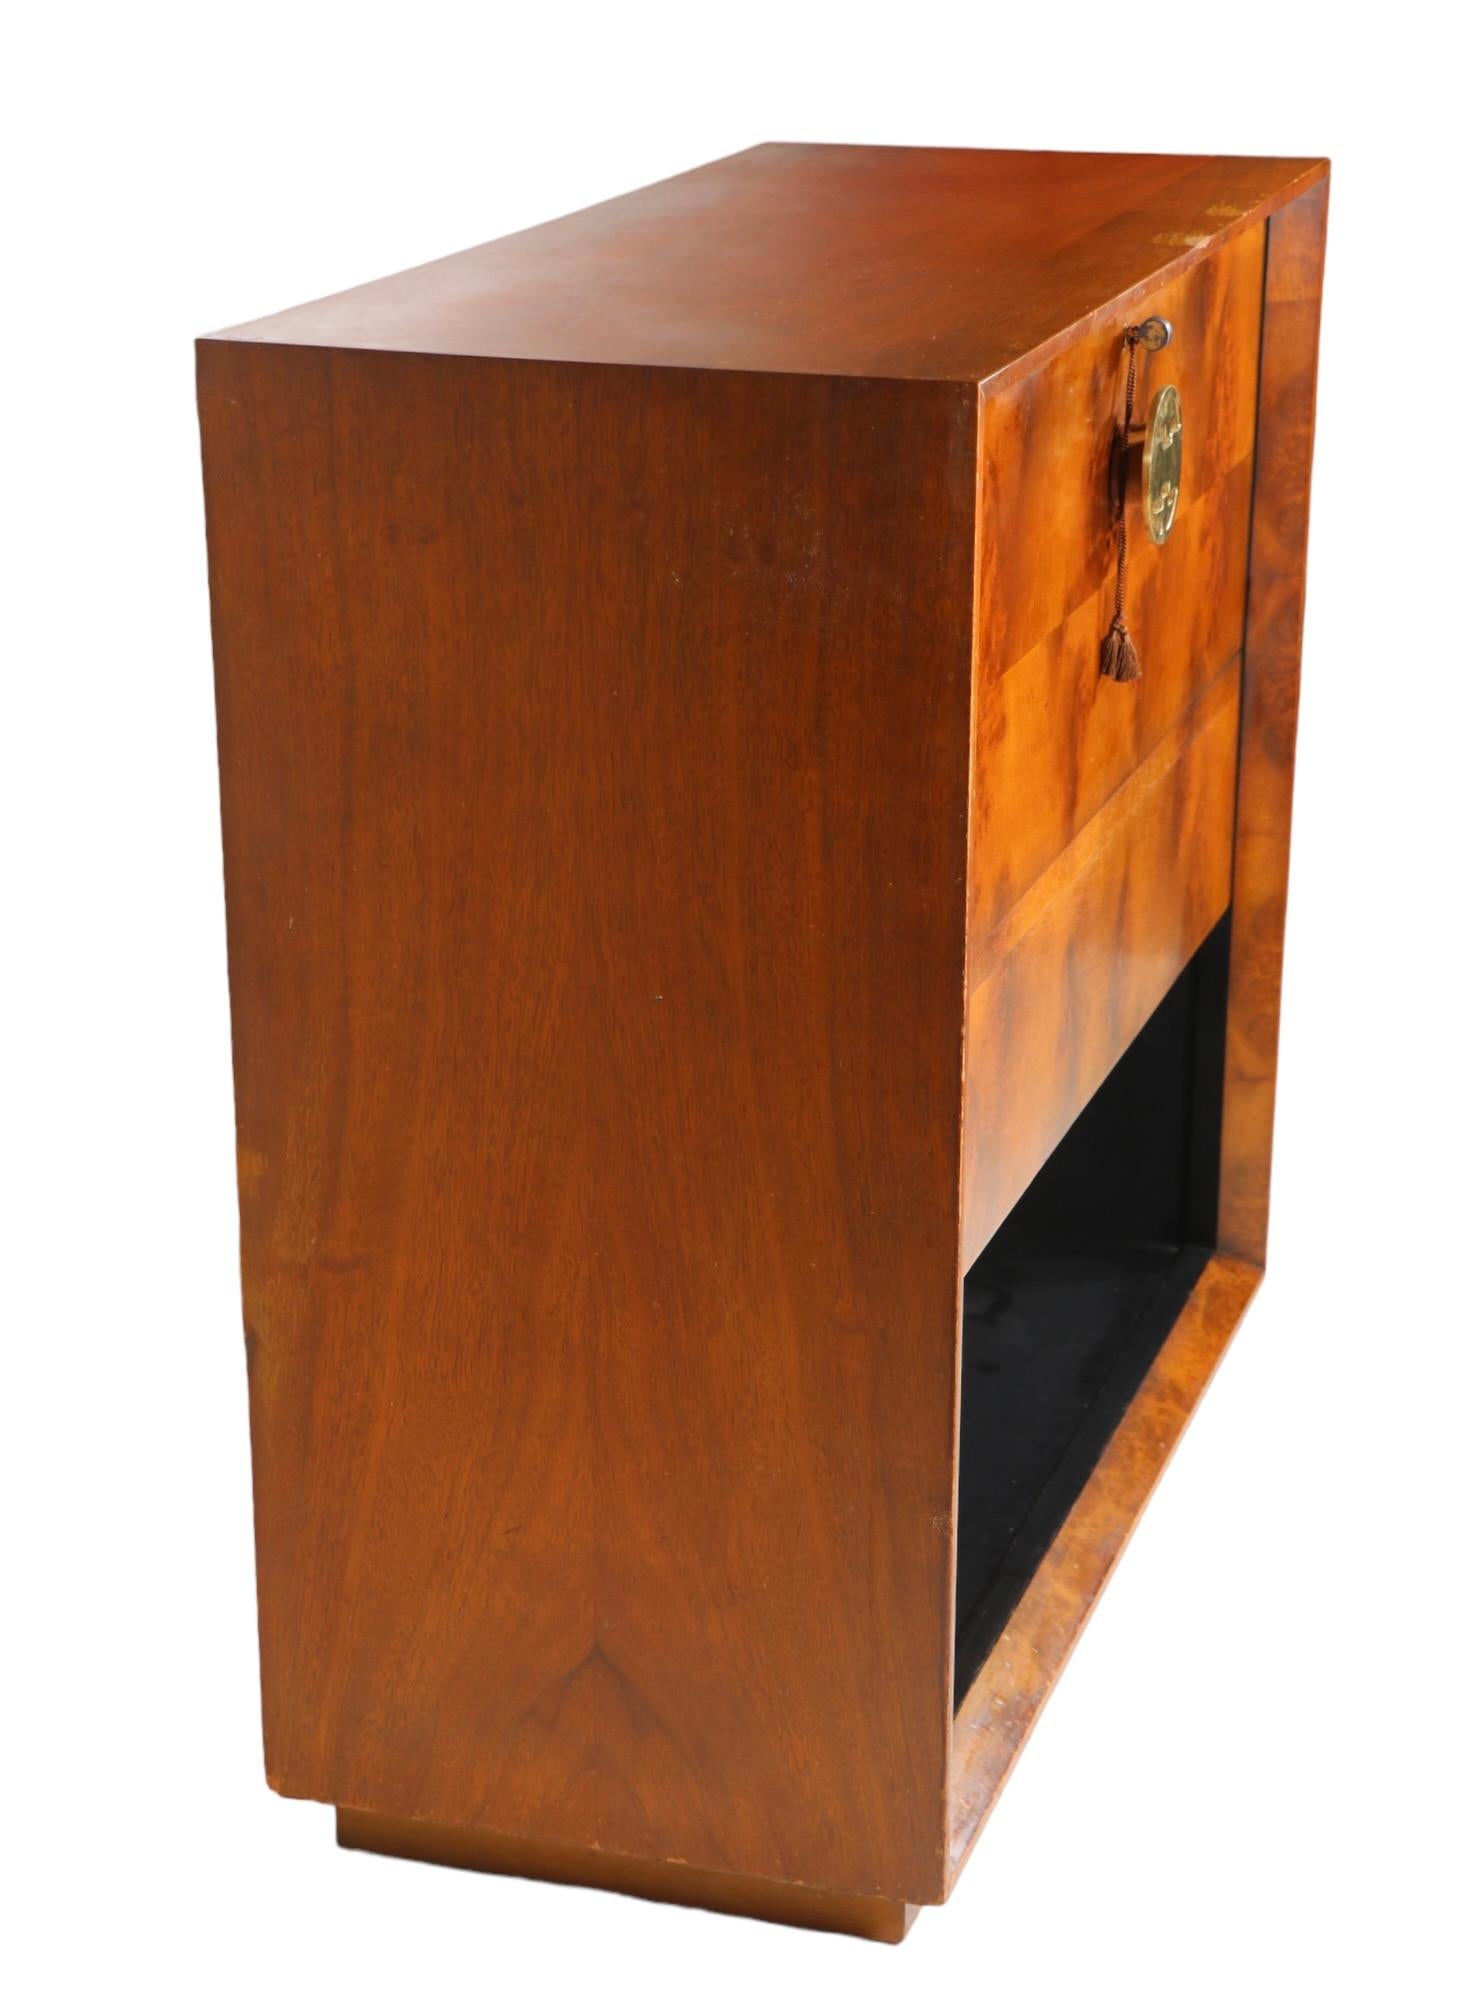 Art Deco Palladio Fall Front Desk by Gilbert Rohde for Herman Miller c. 1940’s For Sale 6